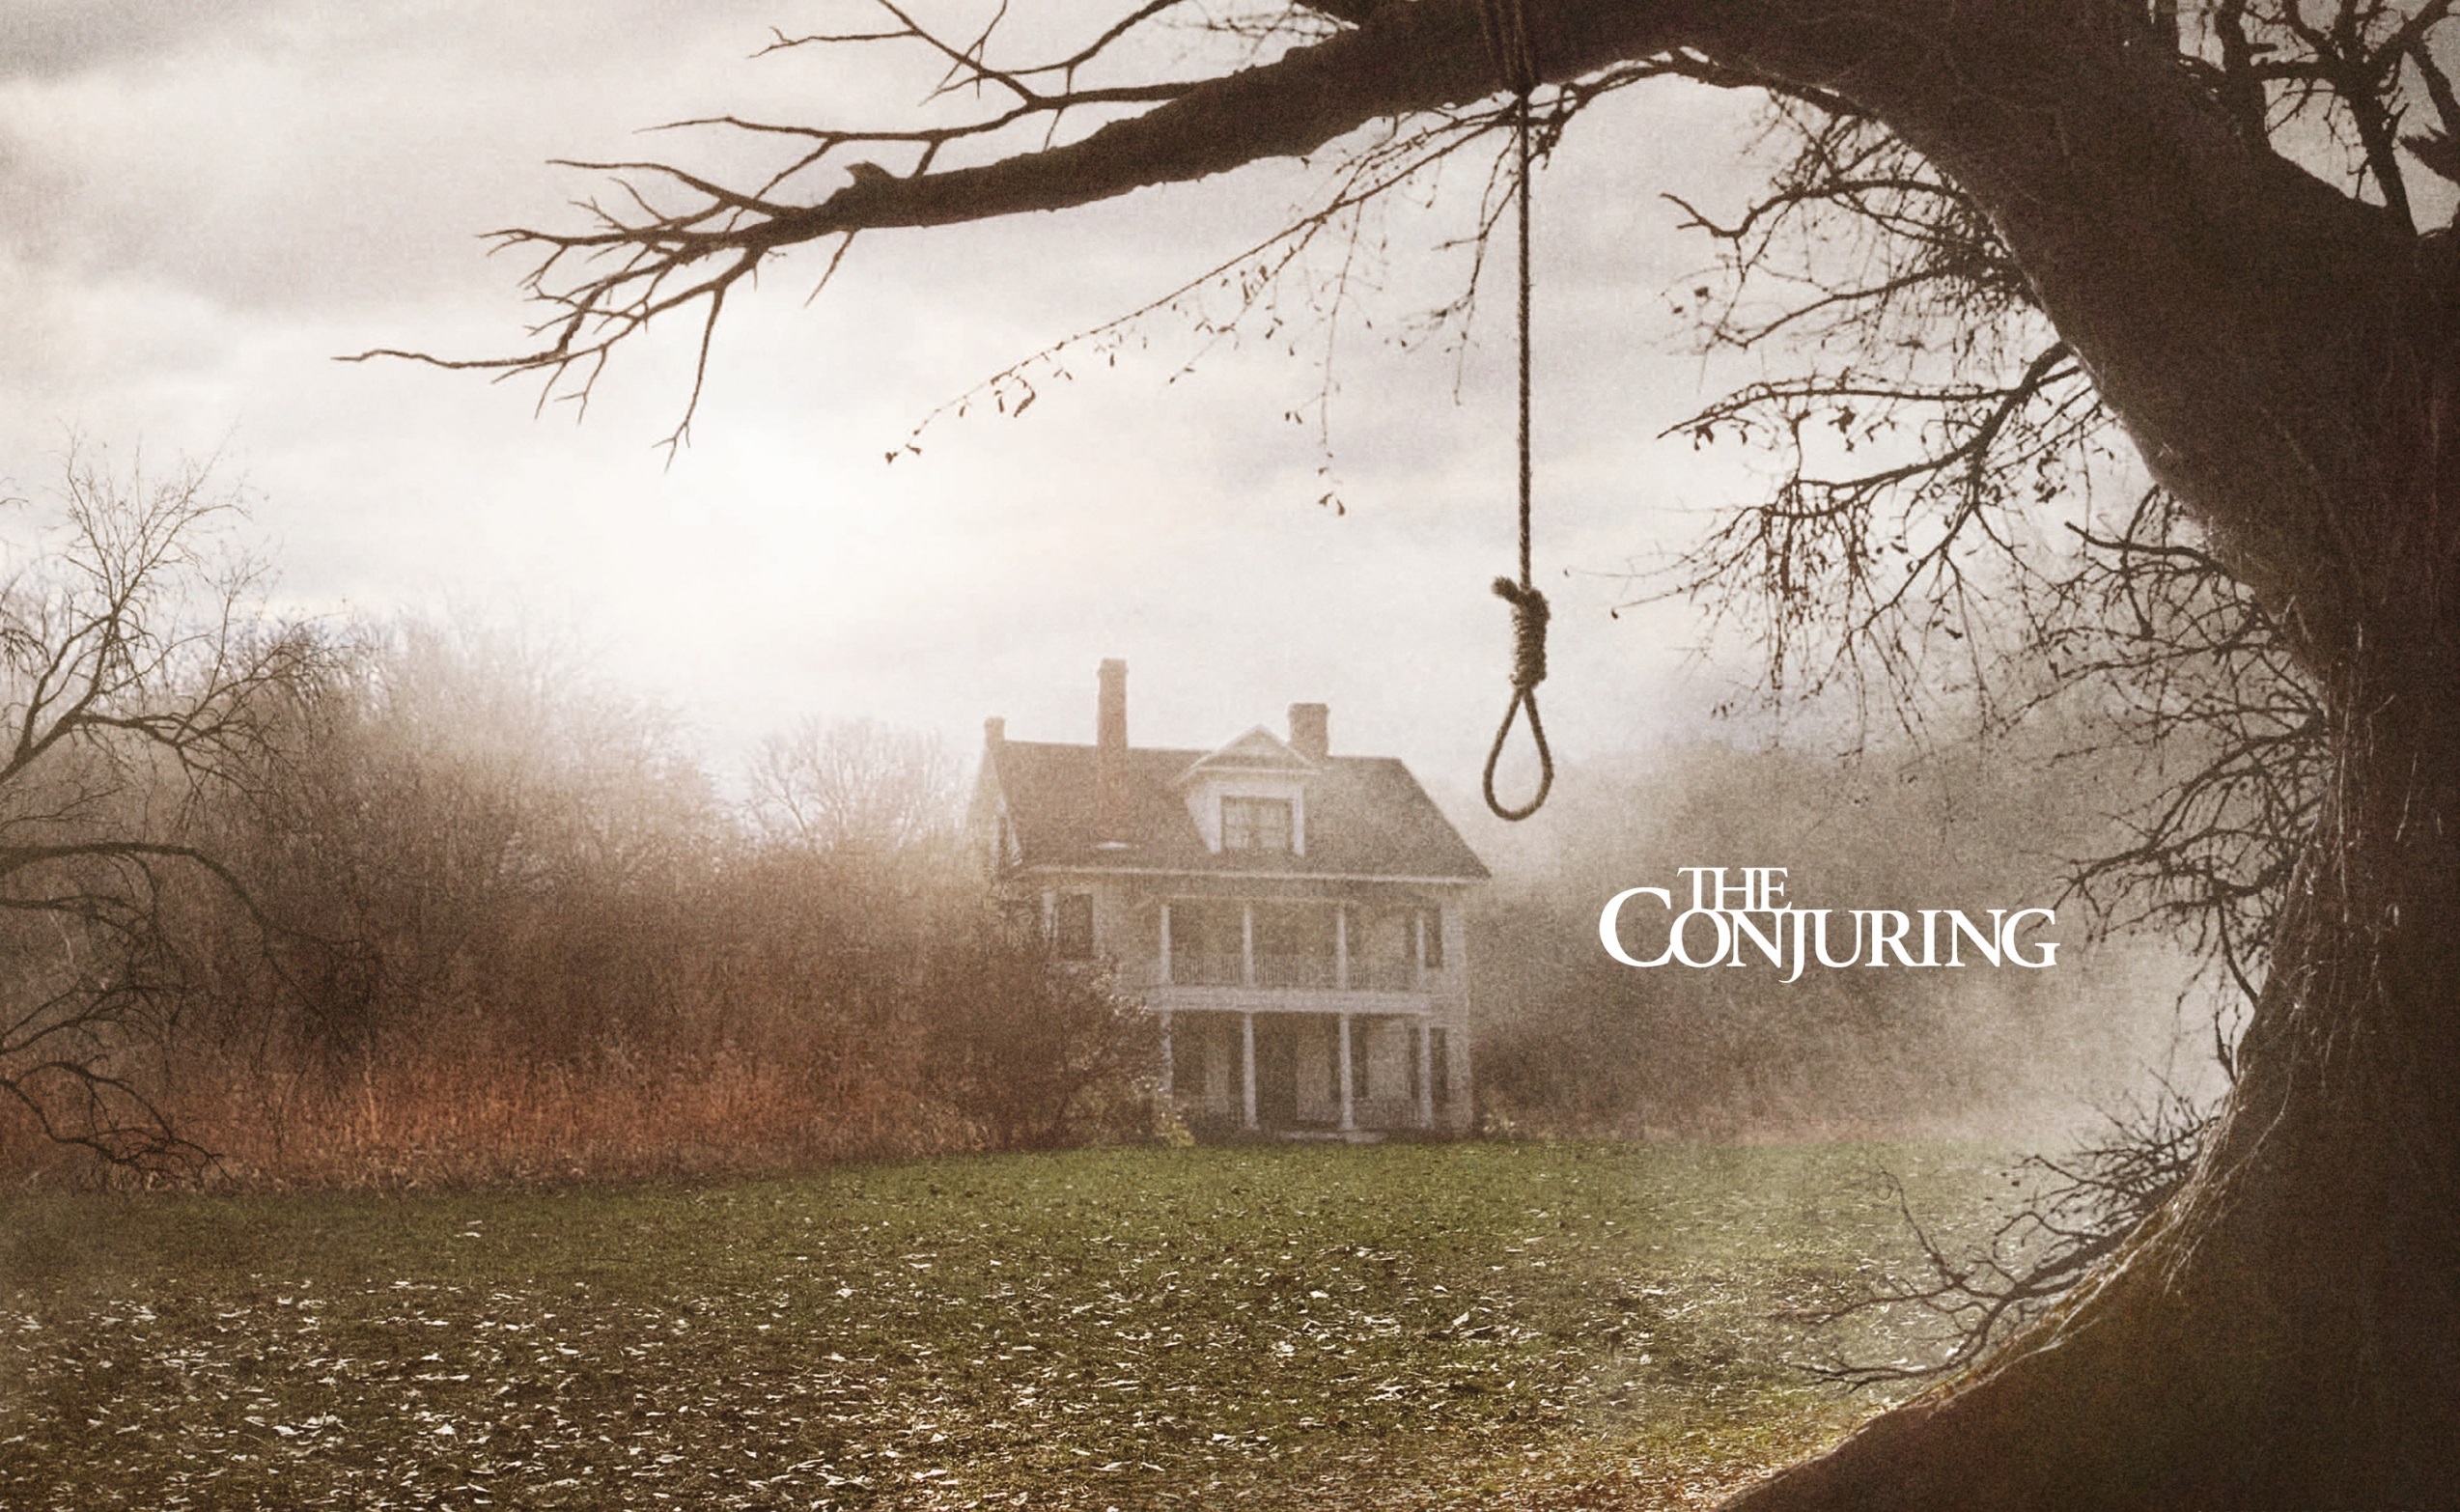 HD Quality Wallpaper | Collection: Movie, 2548x1566 The Conjuring